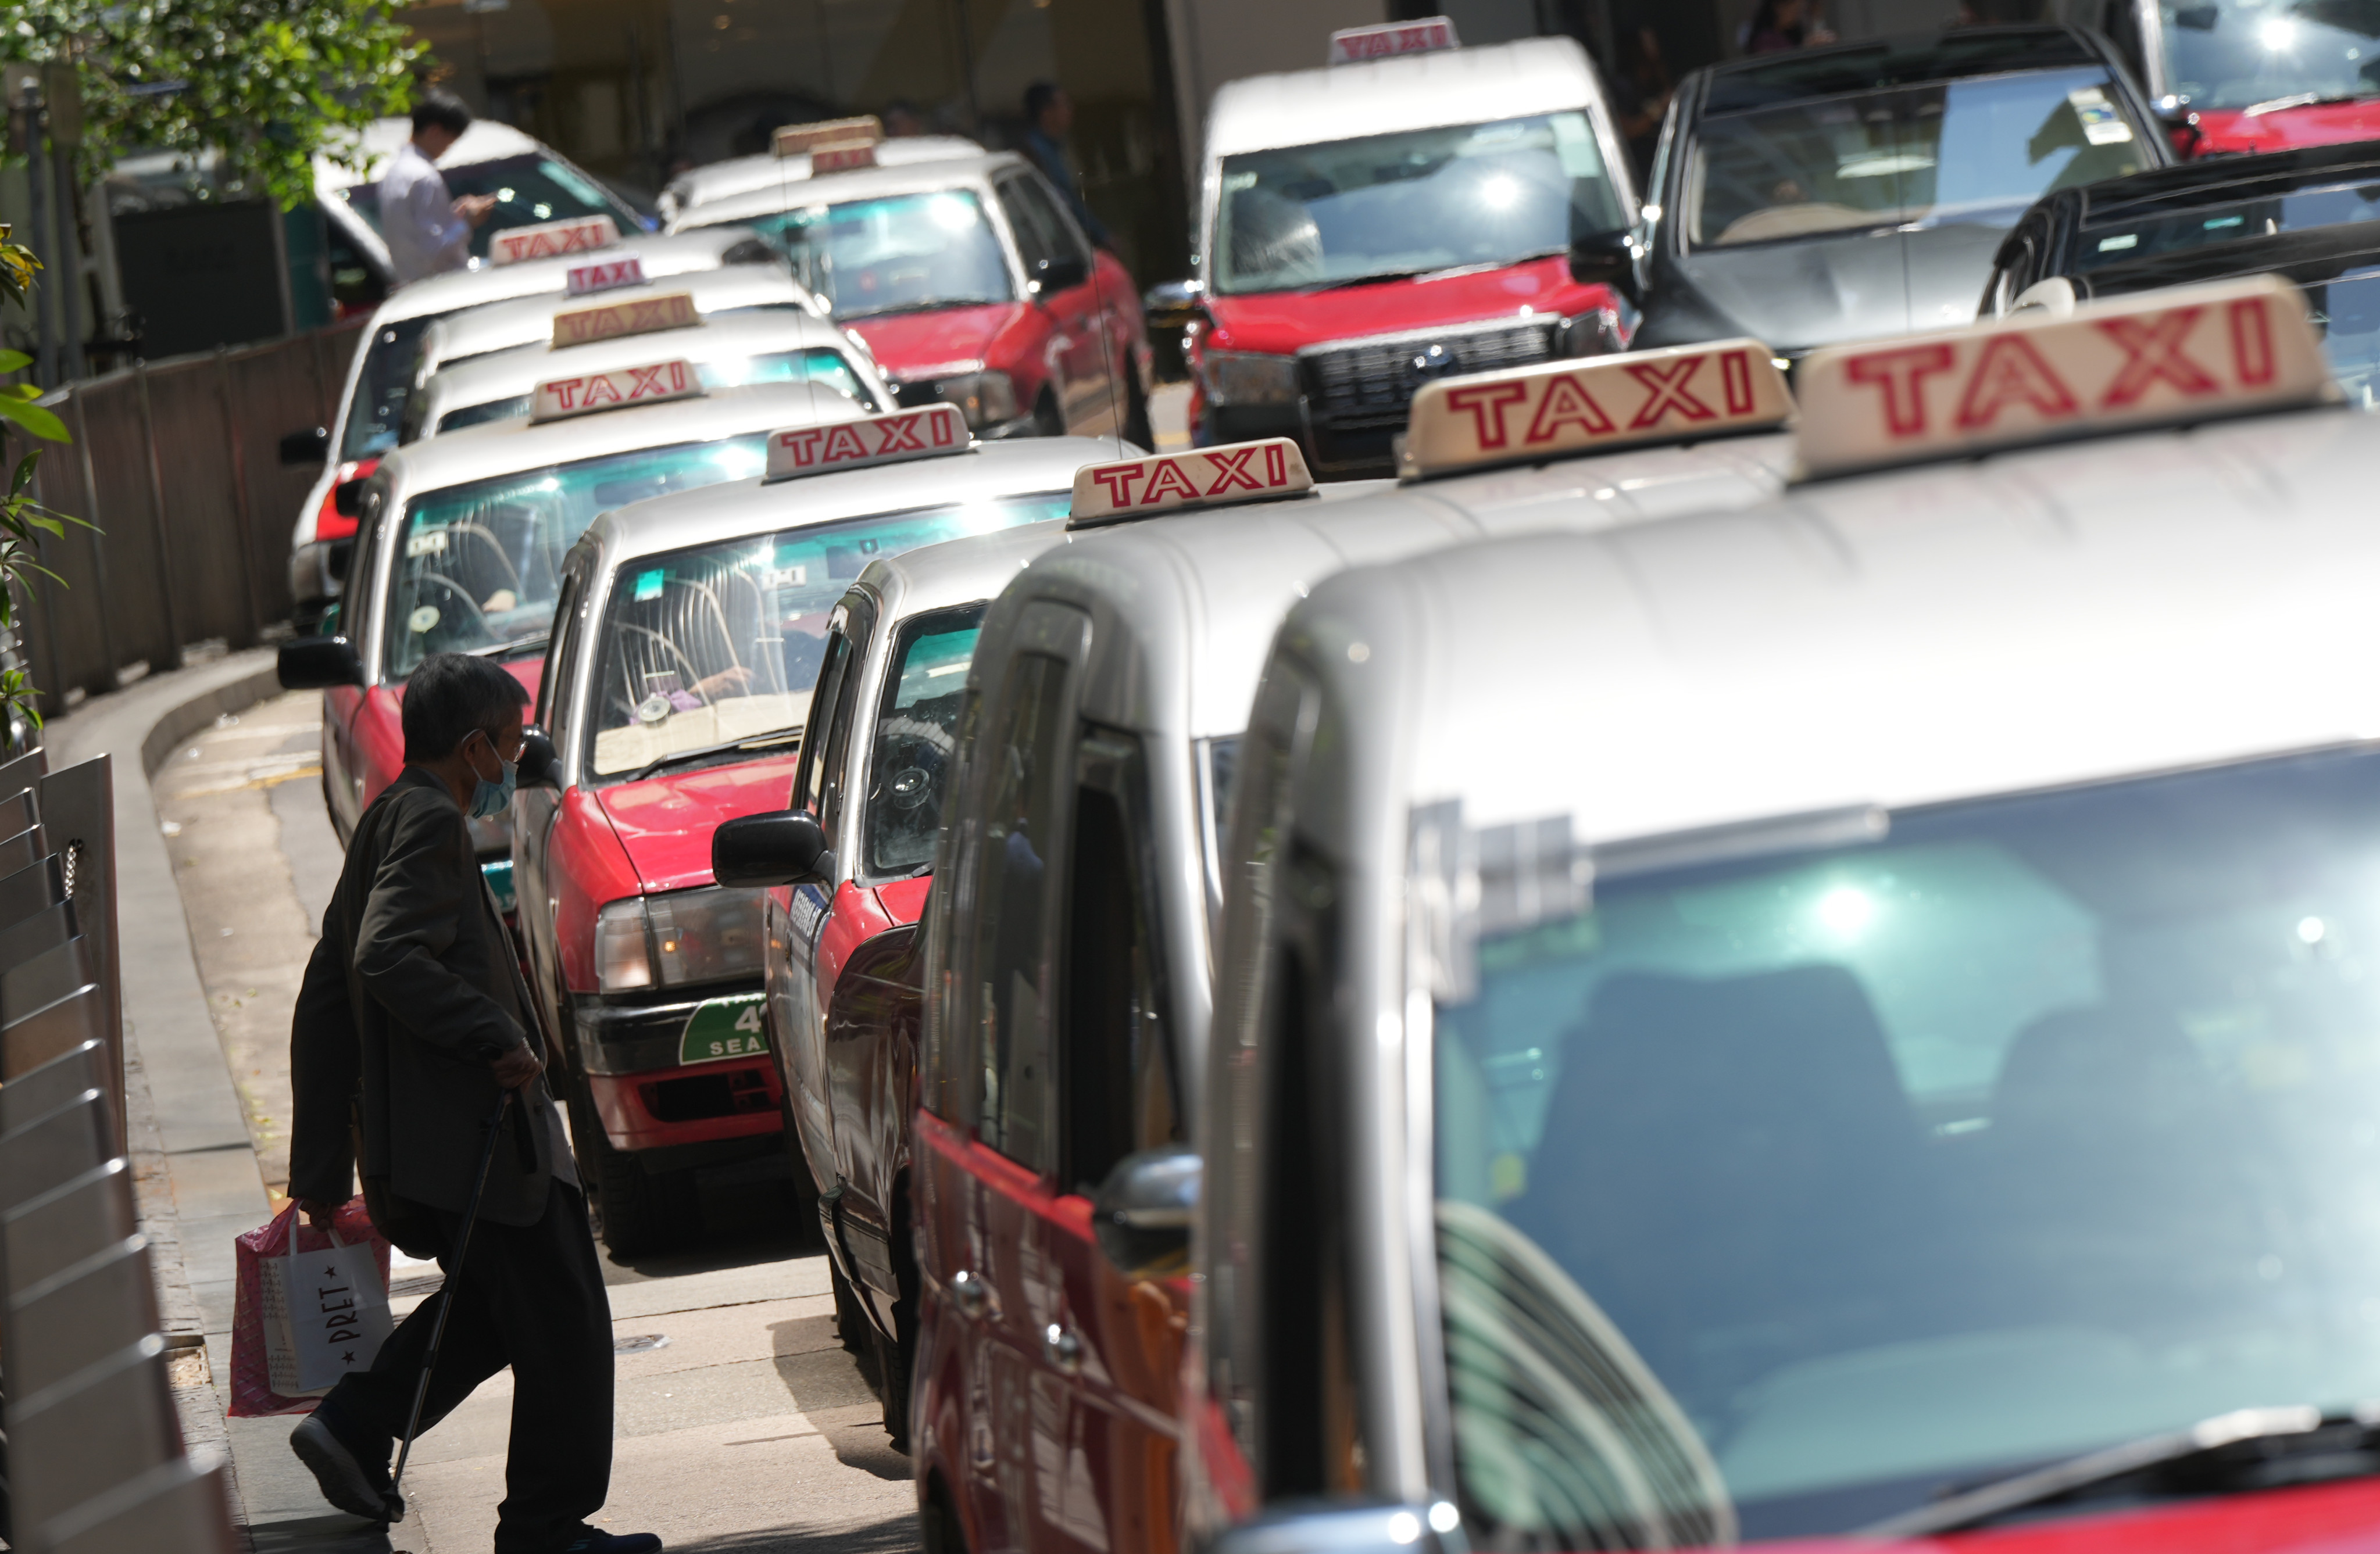 Taxis in Hong Kong’s Central district. Ride-hailing rivals such as Uber operate in a legal grey area, undeterred by relatively few prosecutions of drivers. Photo: May Tse